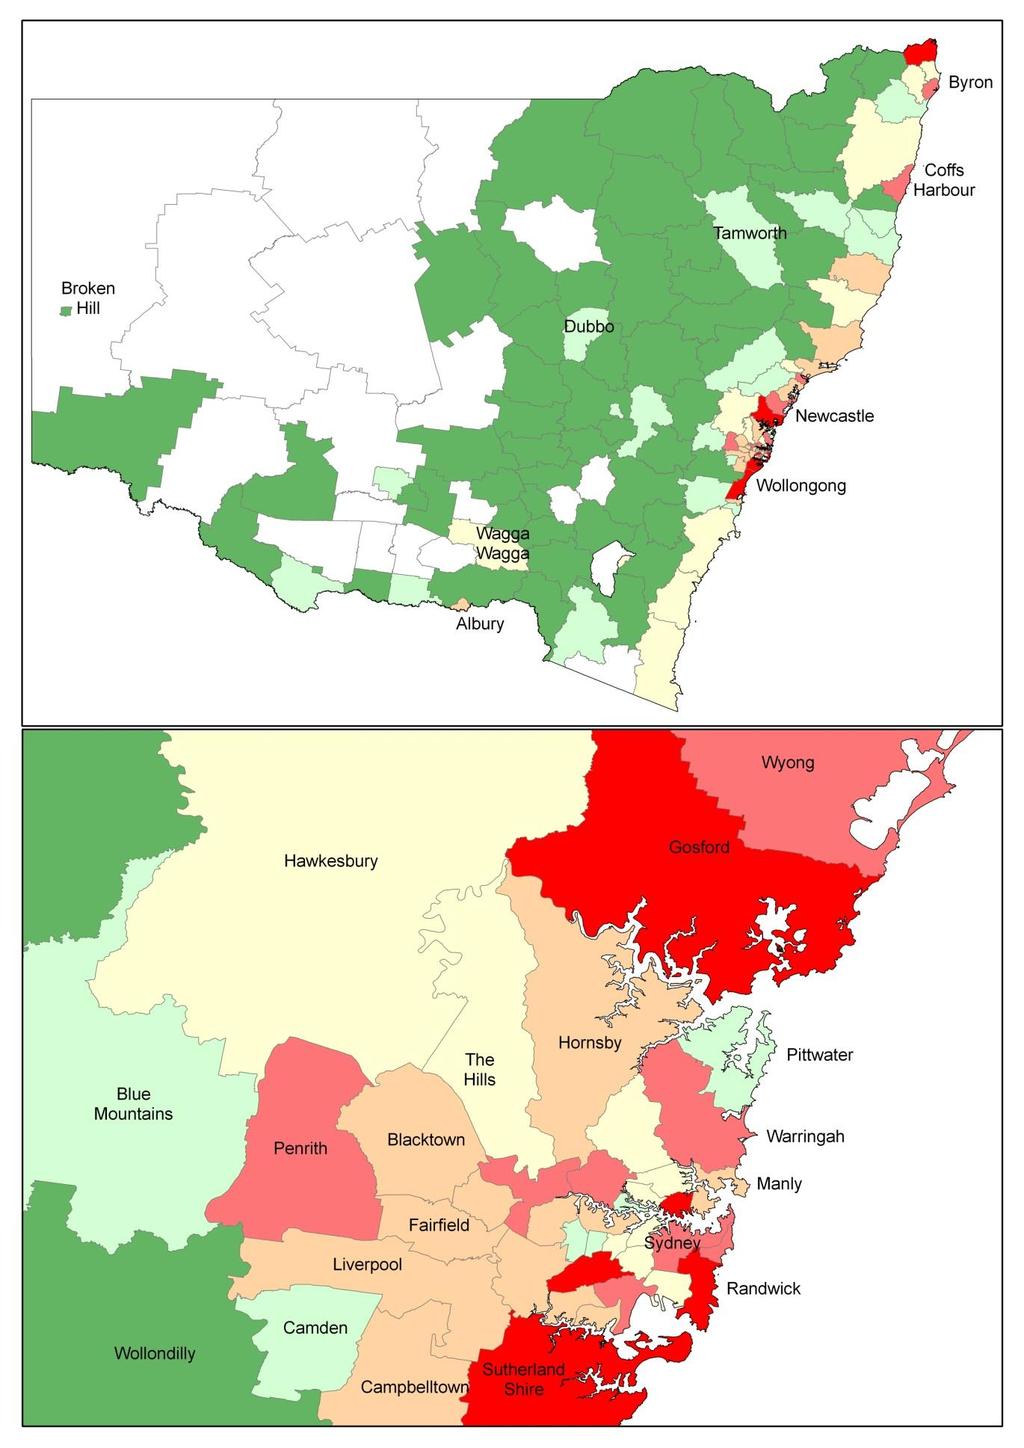 Maps 1 and 2: Number of residential and mixed use schemes* for NSW and Sydney by LGA,